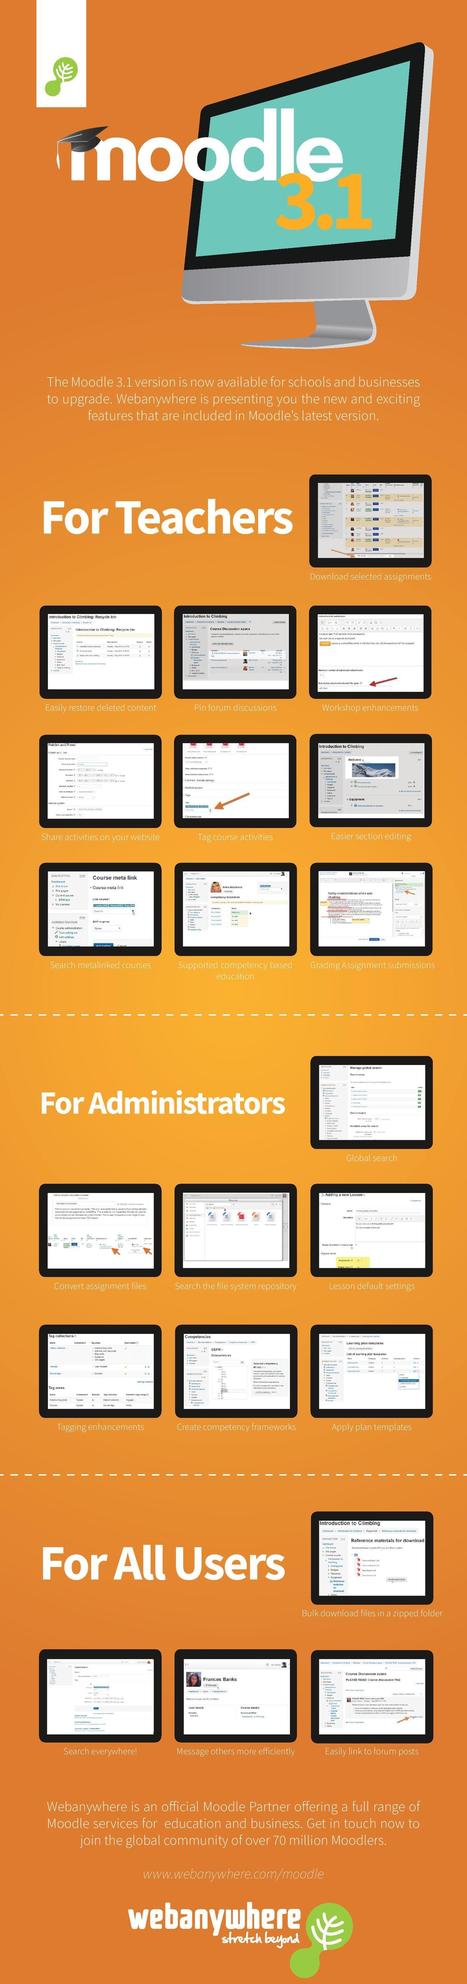 Moodle 3.1 New Features Infographic | Moodle and Web 2.0 | Scoop.it